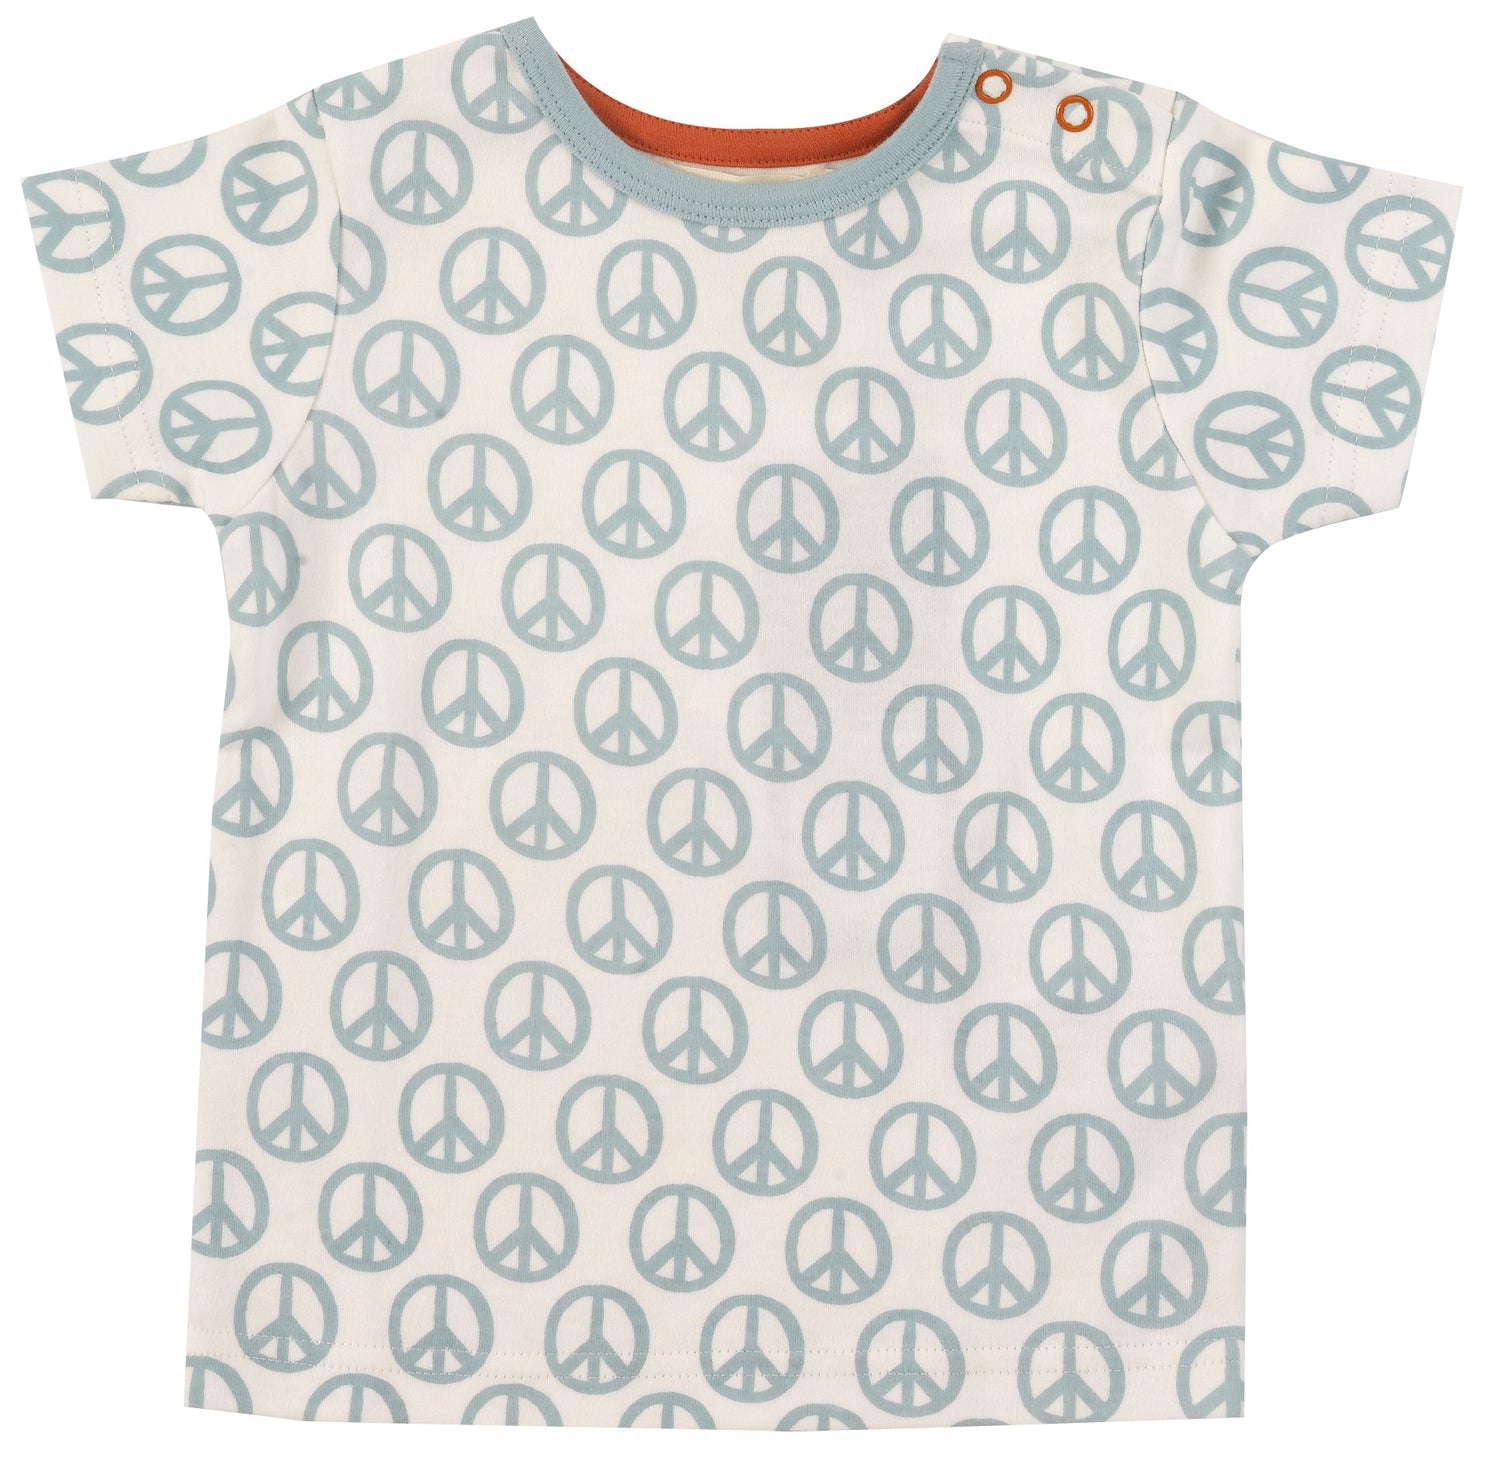 Turquoise peace t-shirt